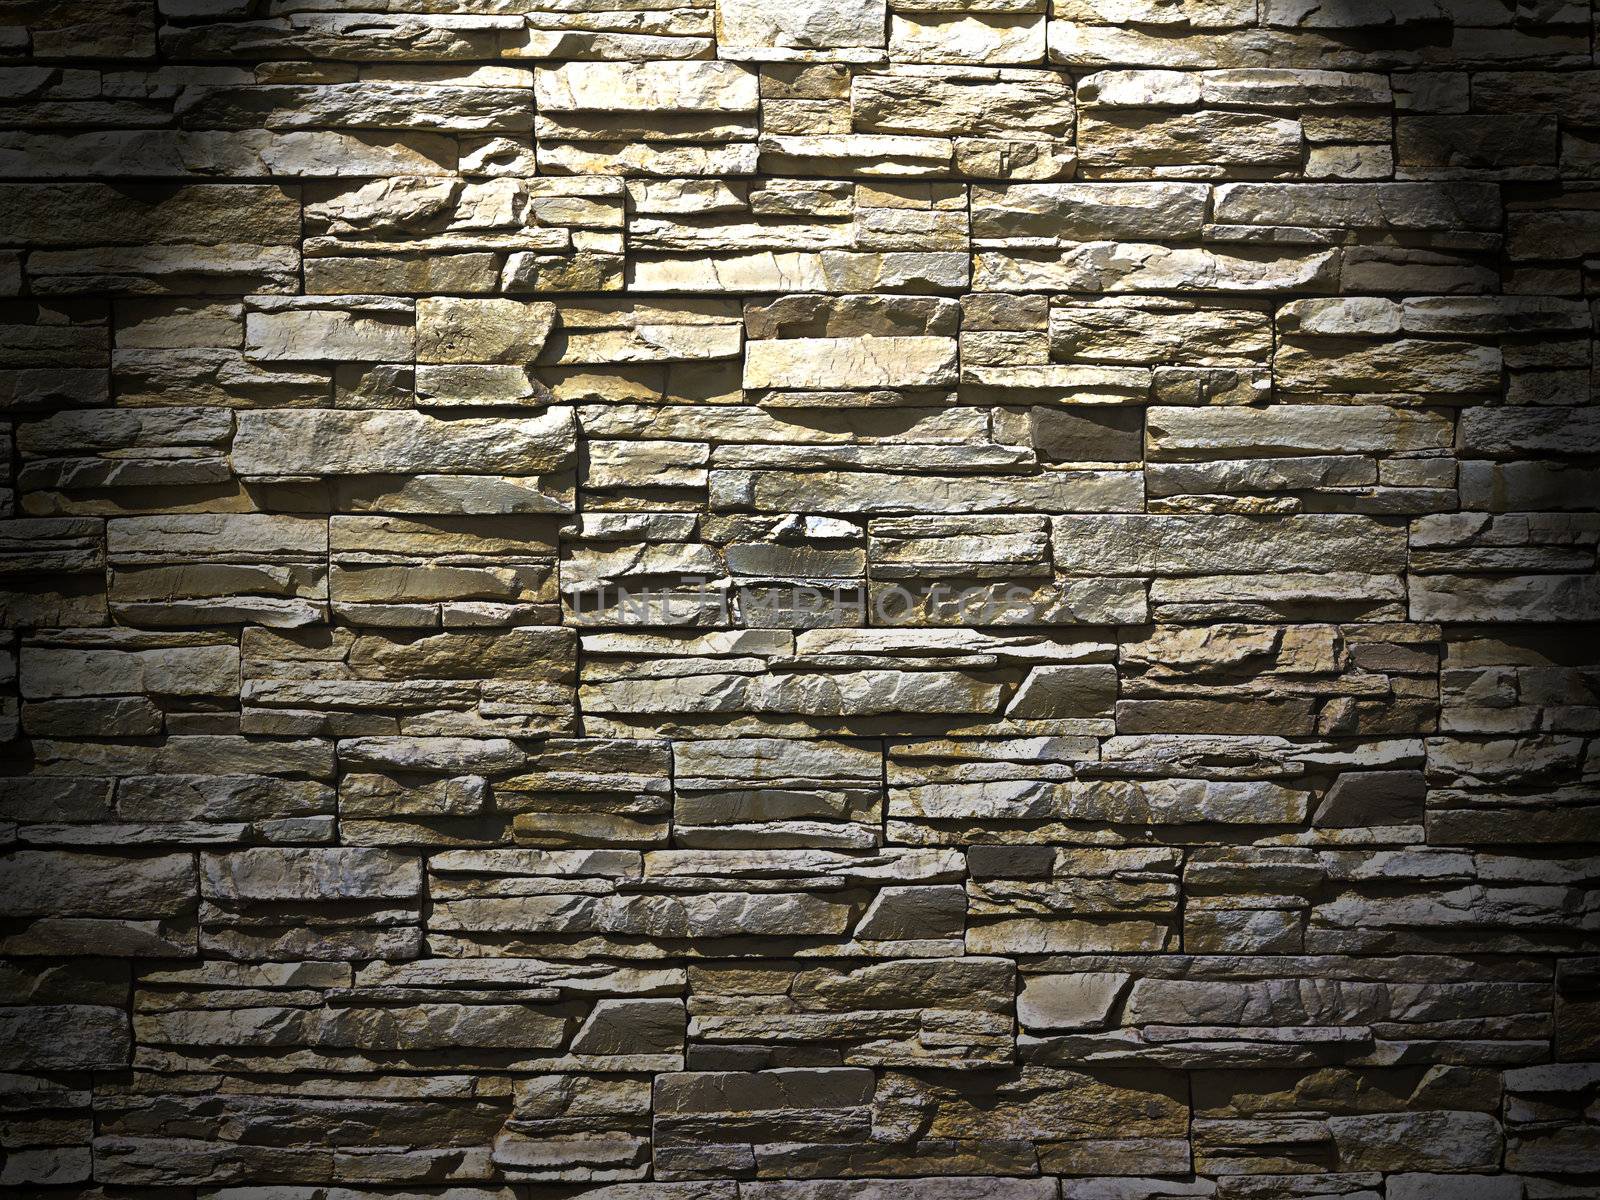 wall of rough stones in the background, highlight
	
